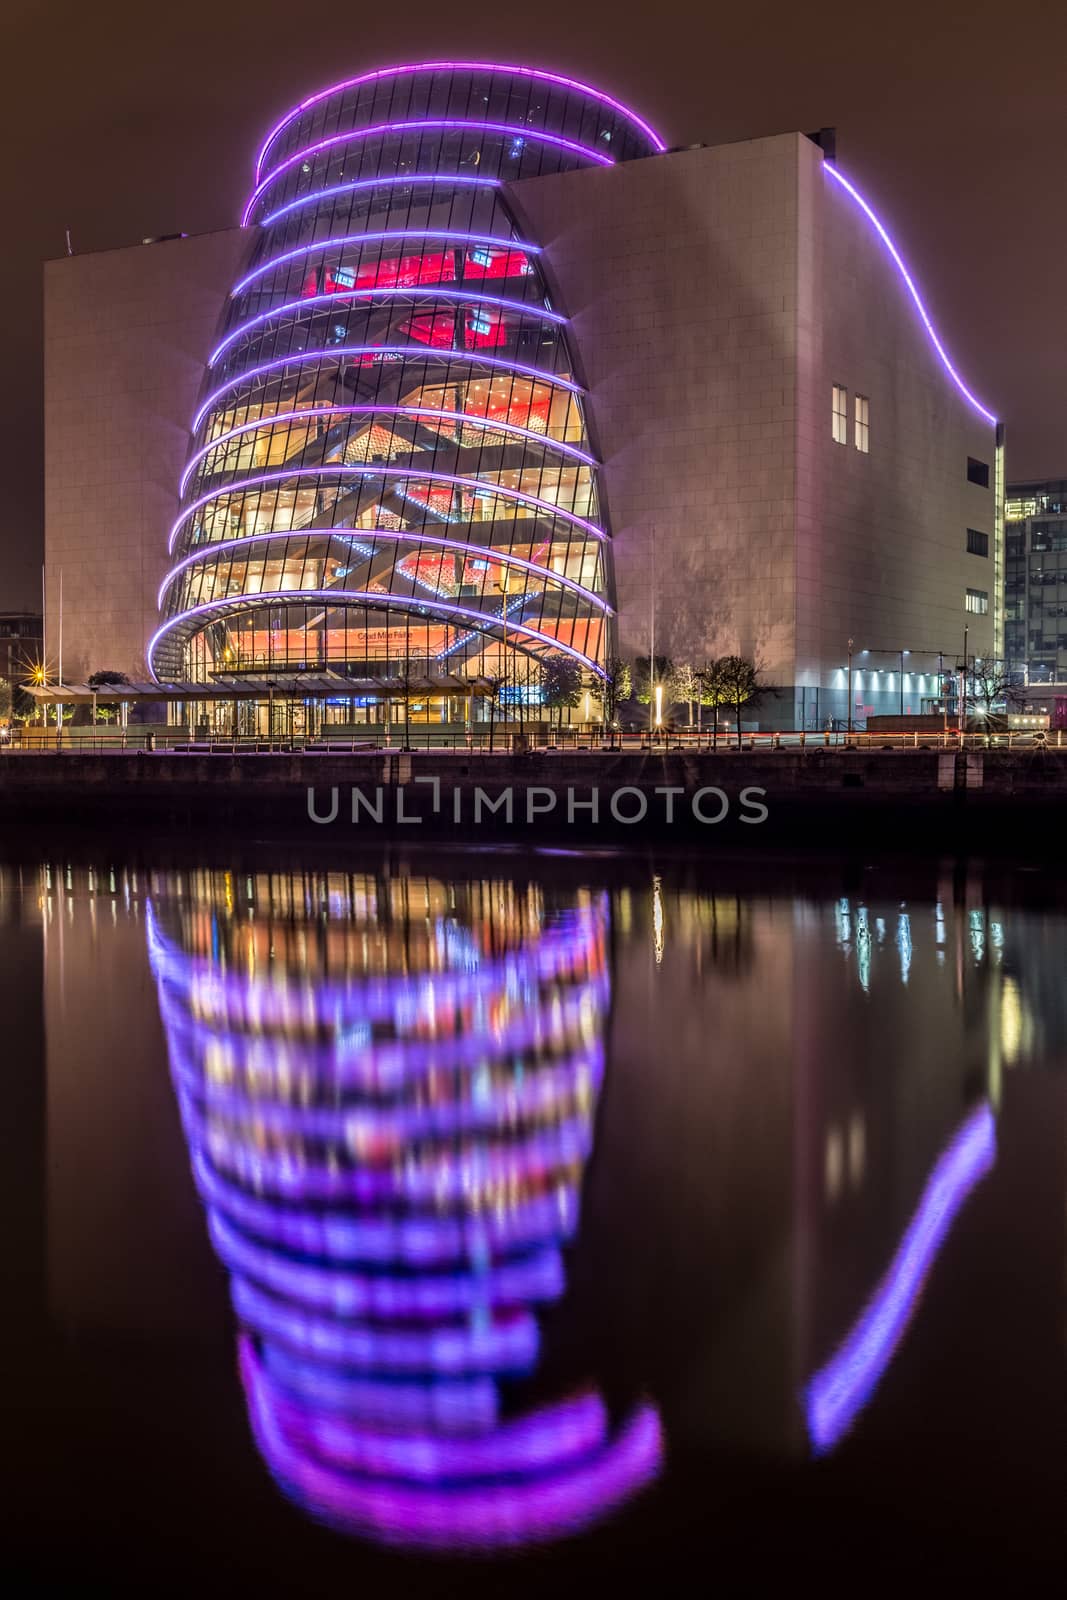 DUBLIN, IRELAND -20 JAN 2016- Opened in 2010, the Dublin Convention Center is located on Spencer Dock along the River Liffey Night by mlechanteur